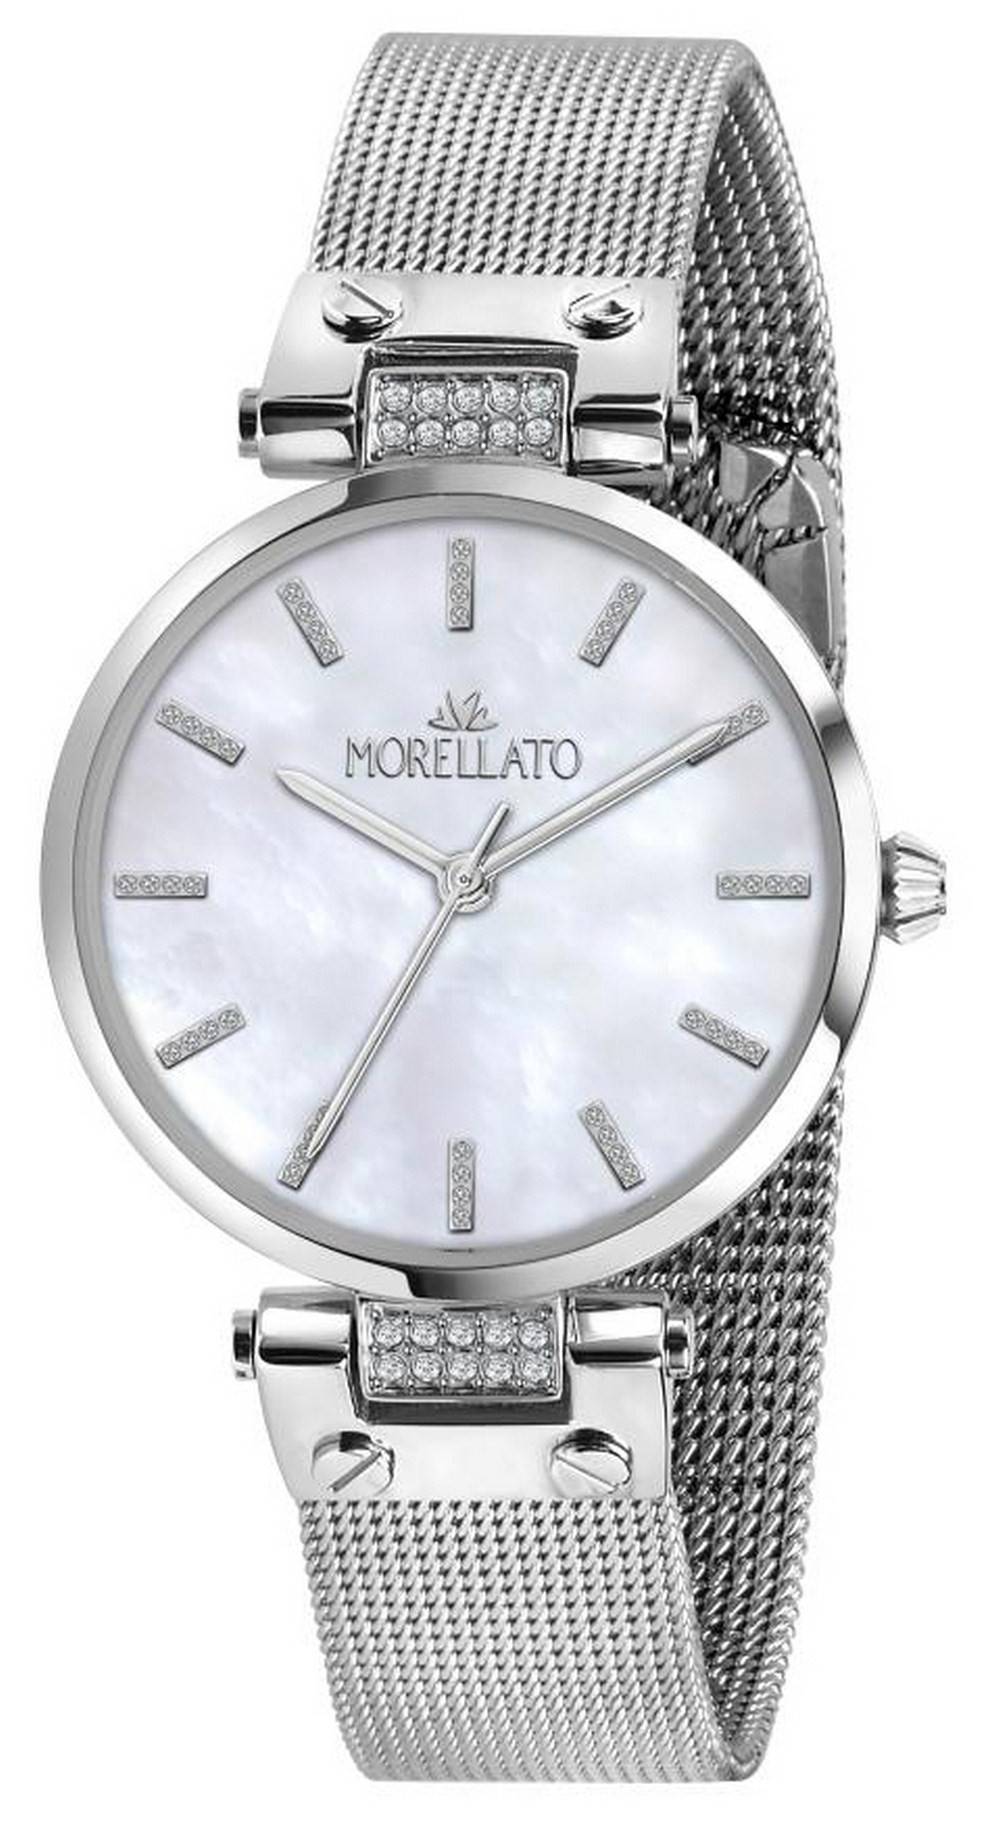 Morellato Shine Mother Of Pearl Dial Stainless Steel Quartz R0153162506 Womens Watch